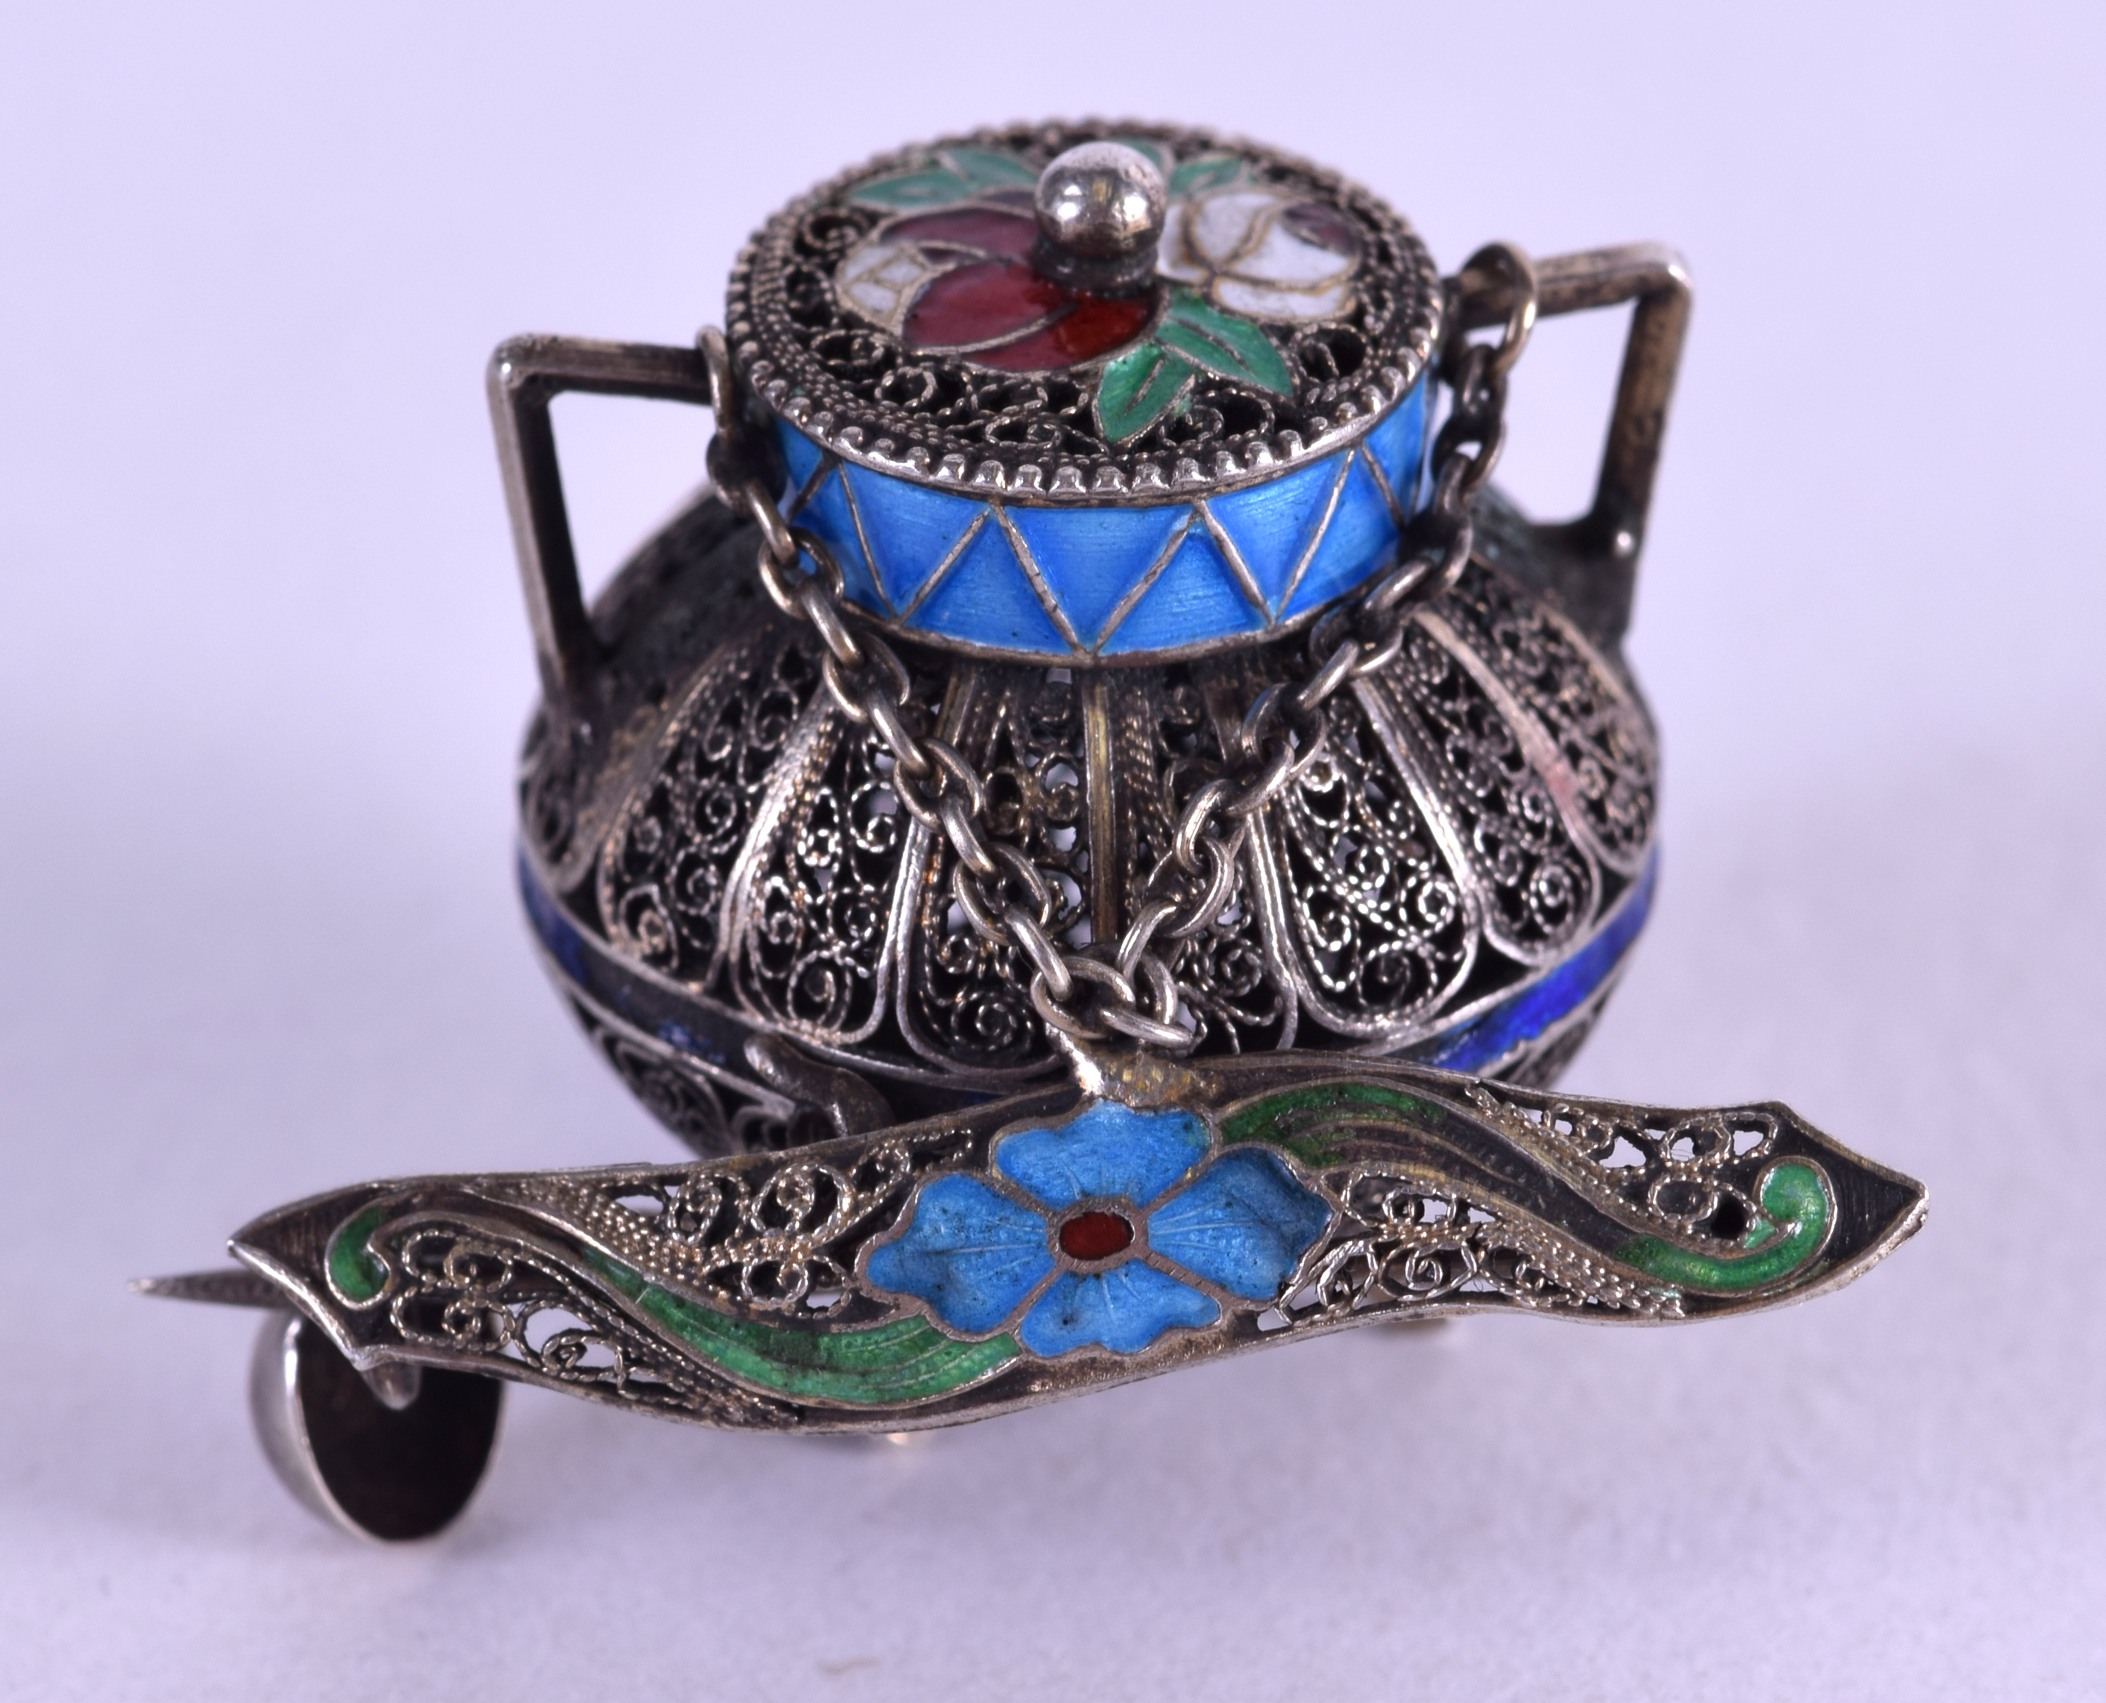 AN UNUSUAL EARLY 20TH CENTURY PORTUGUESE SILVER AND ENAMEL URN BROOCH.